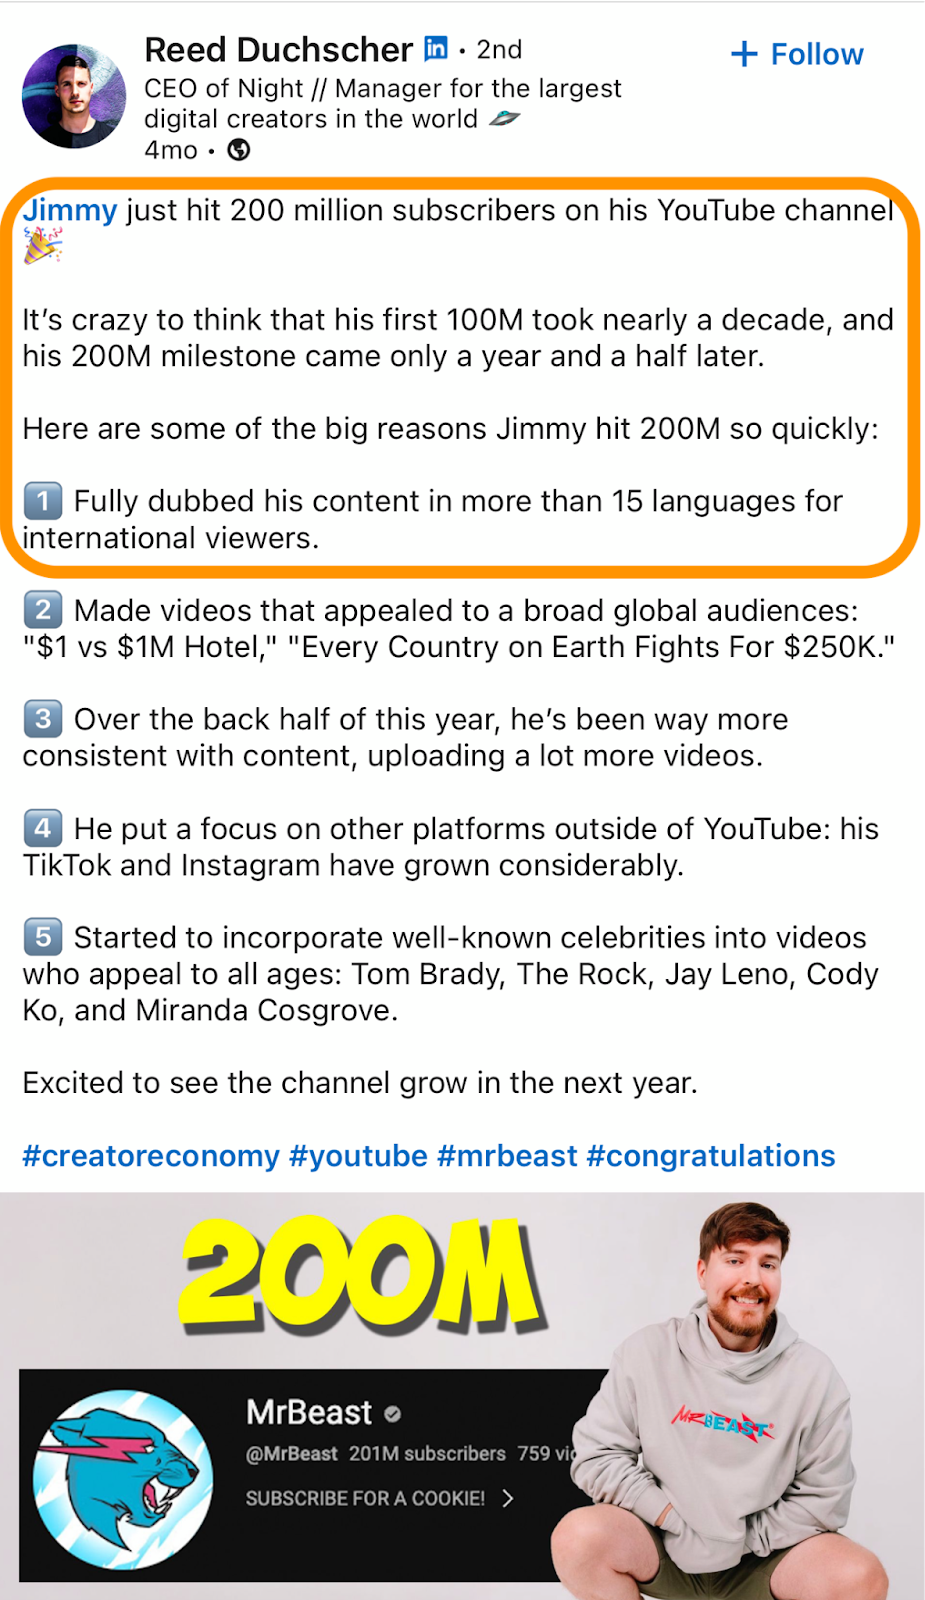 screenshot of a linkedin post annoucing that Mr. Beast hit 200 million youtube subscribers